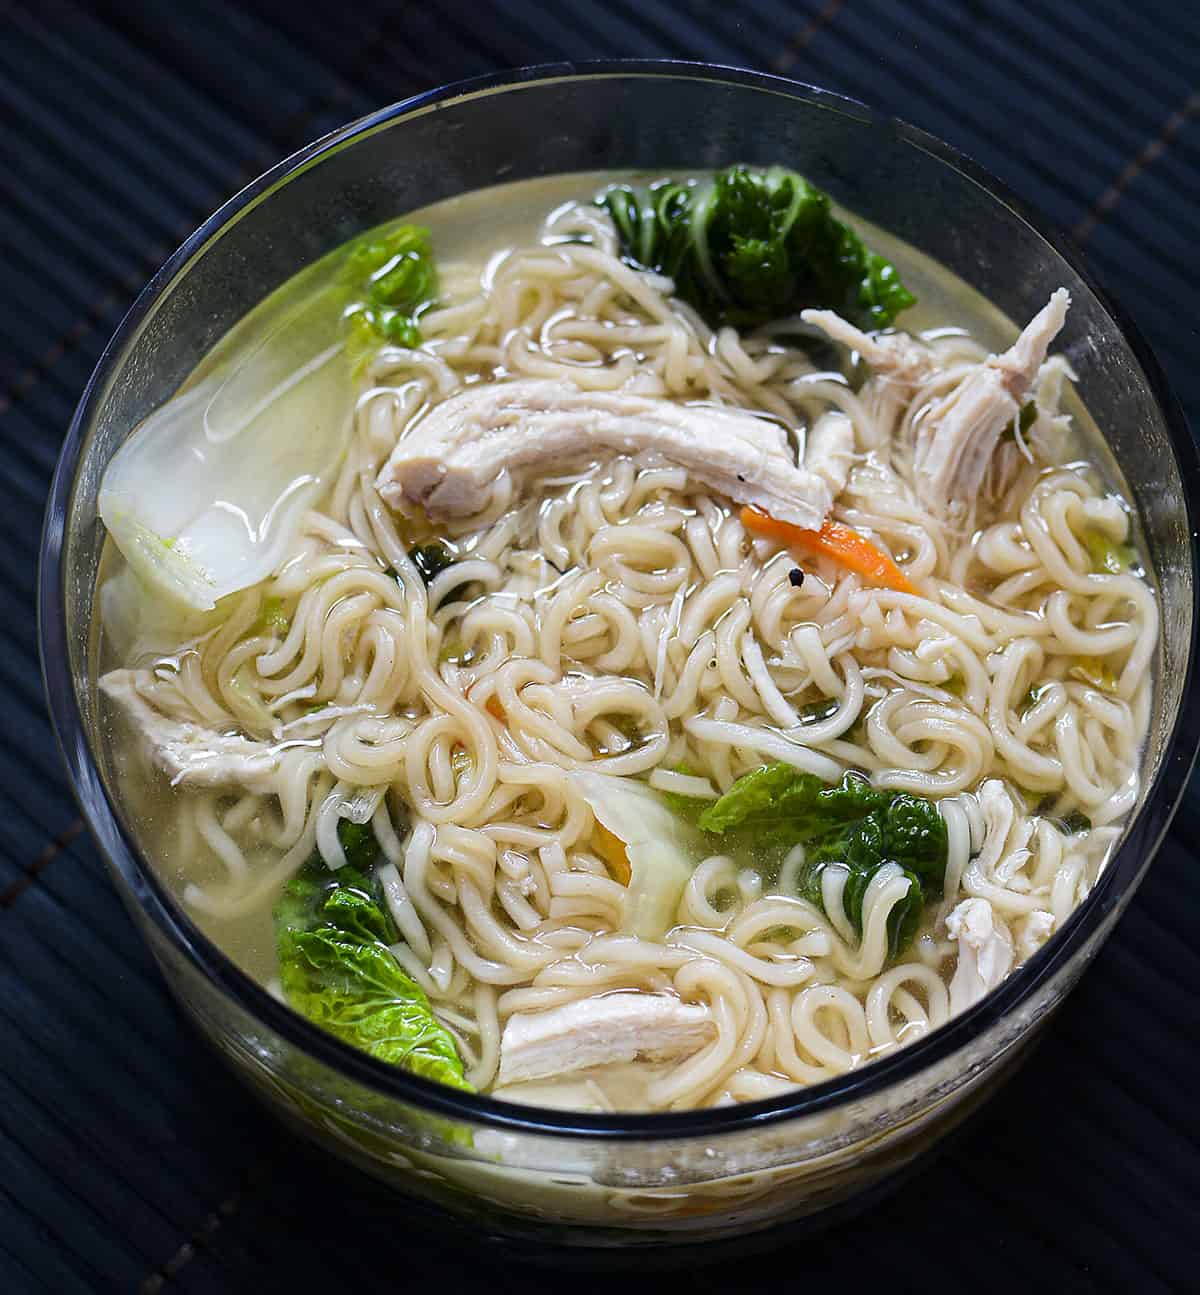 Ramen soup in a round glass bowl on a black background.